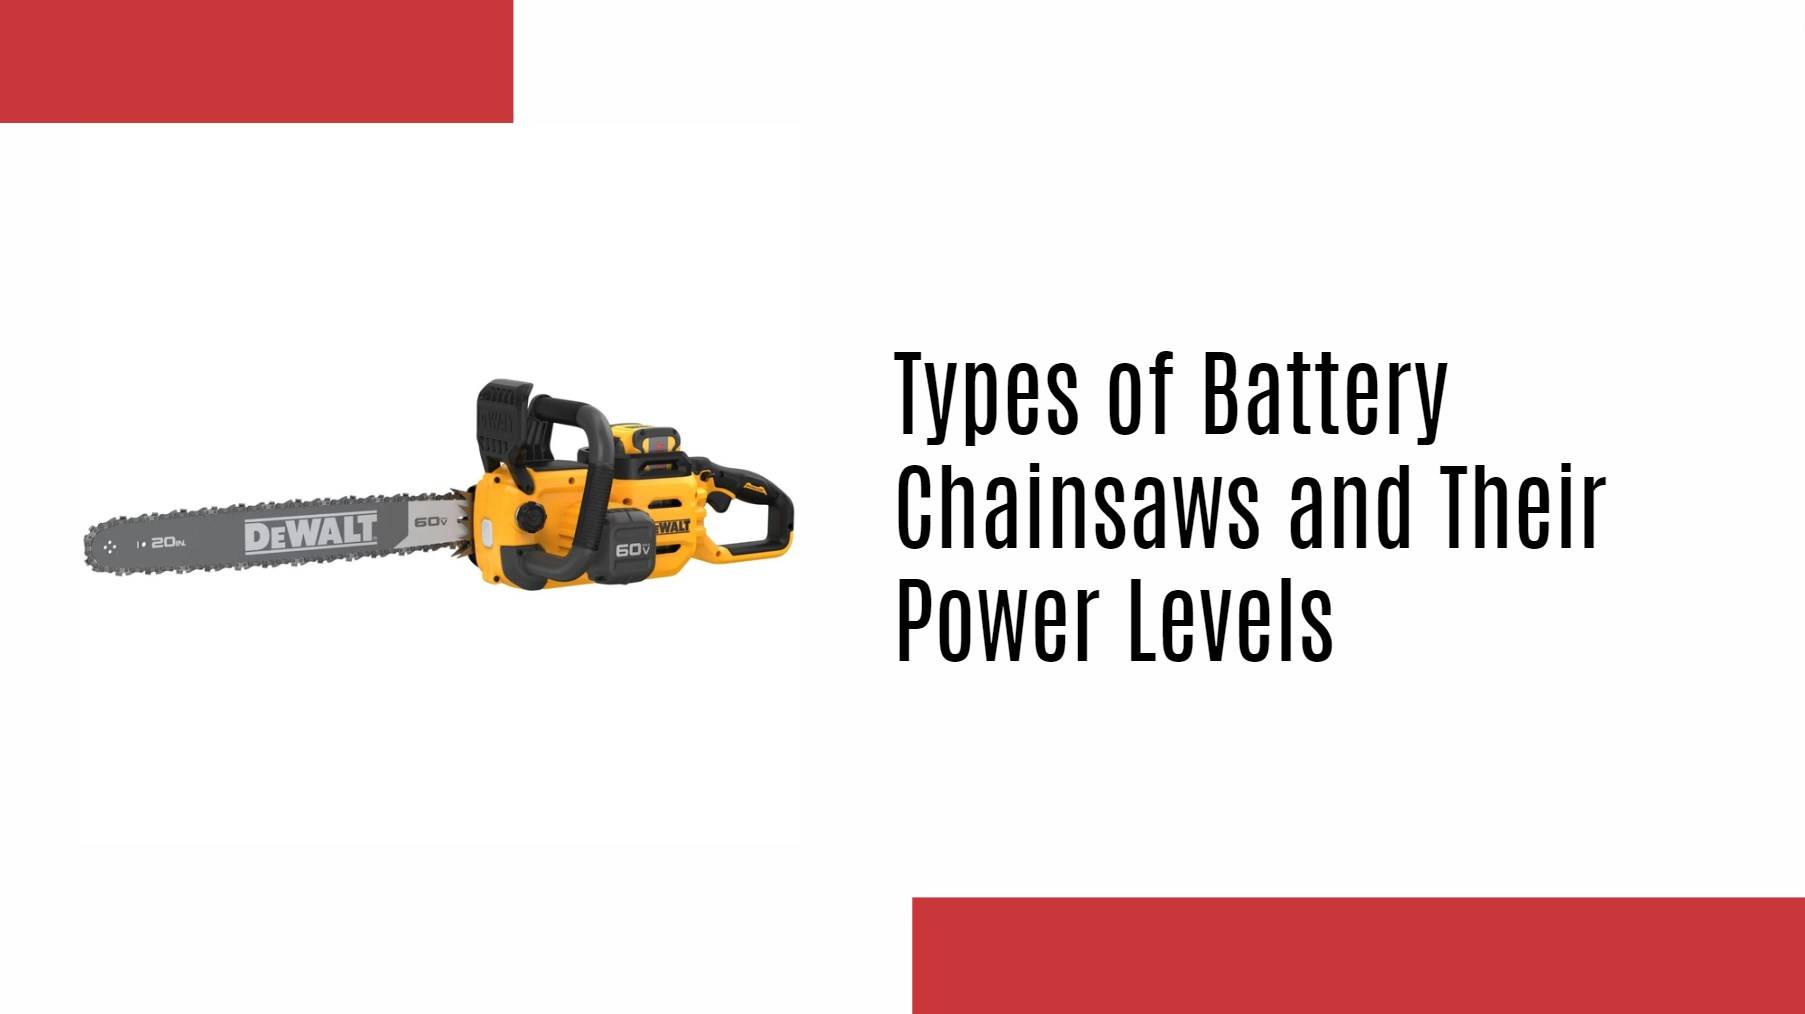 Types of Battery Chainsaws and Their Power Levels